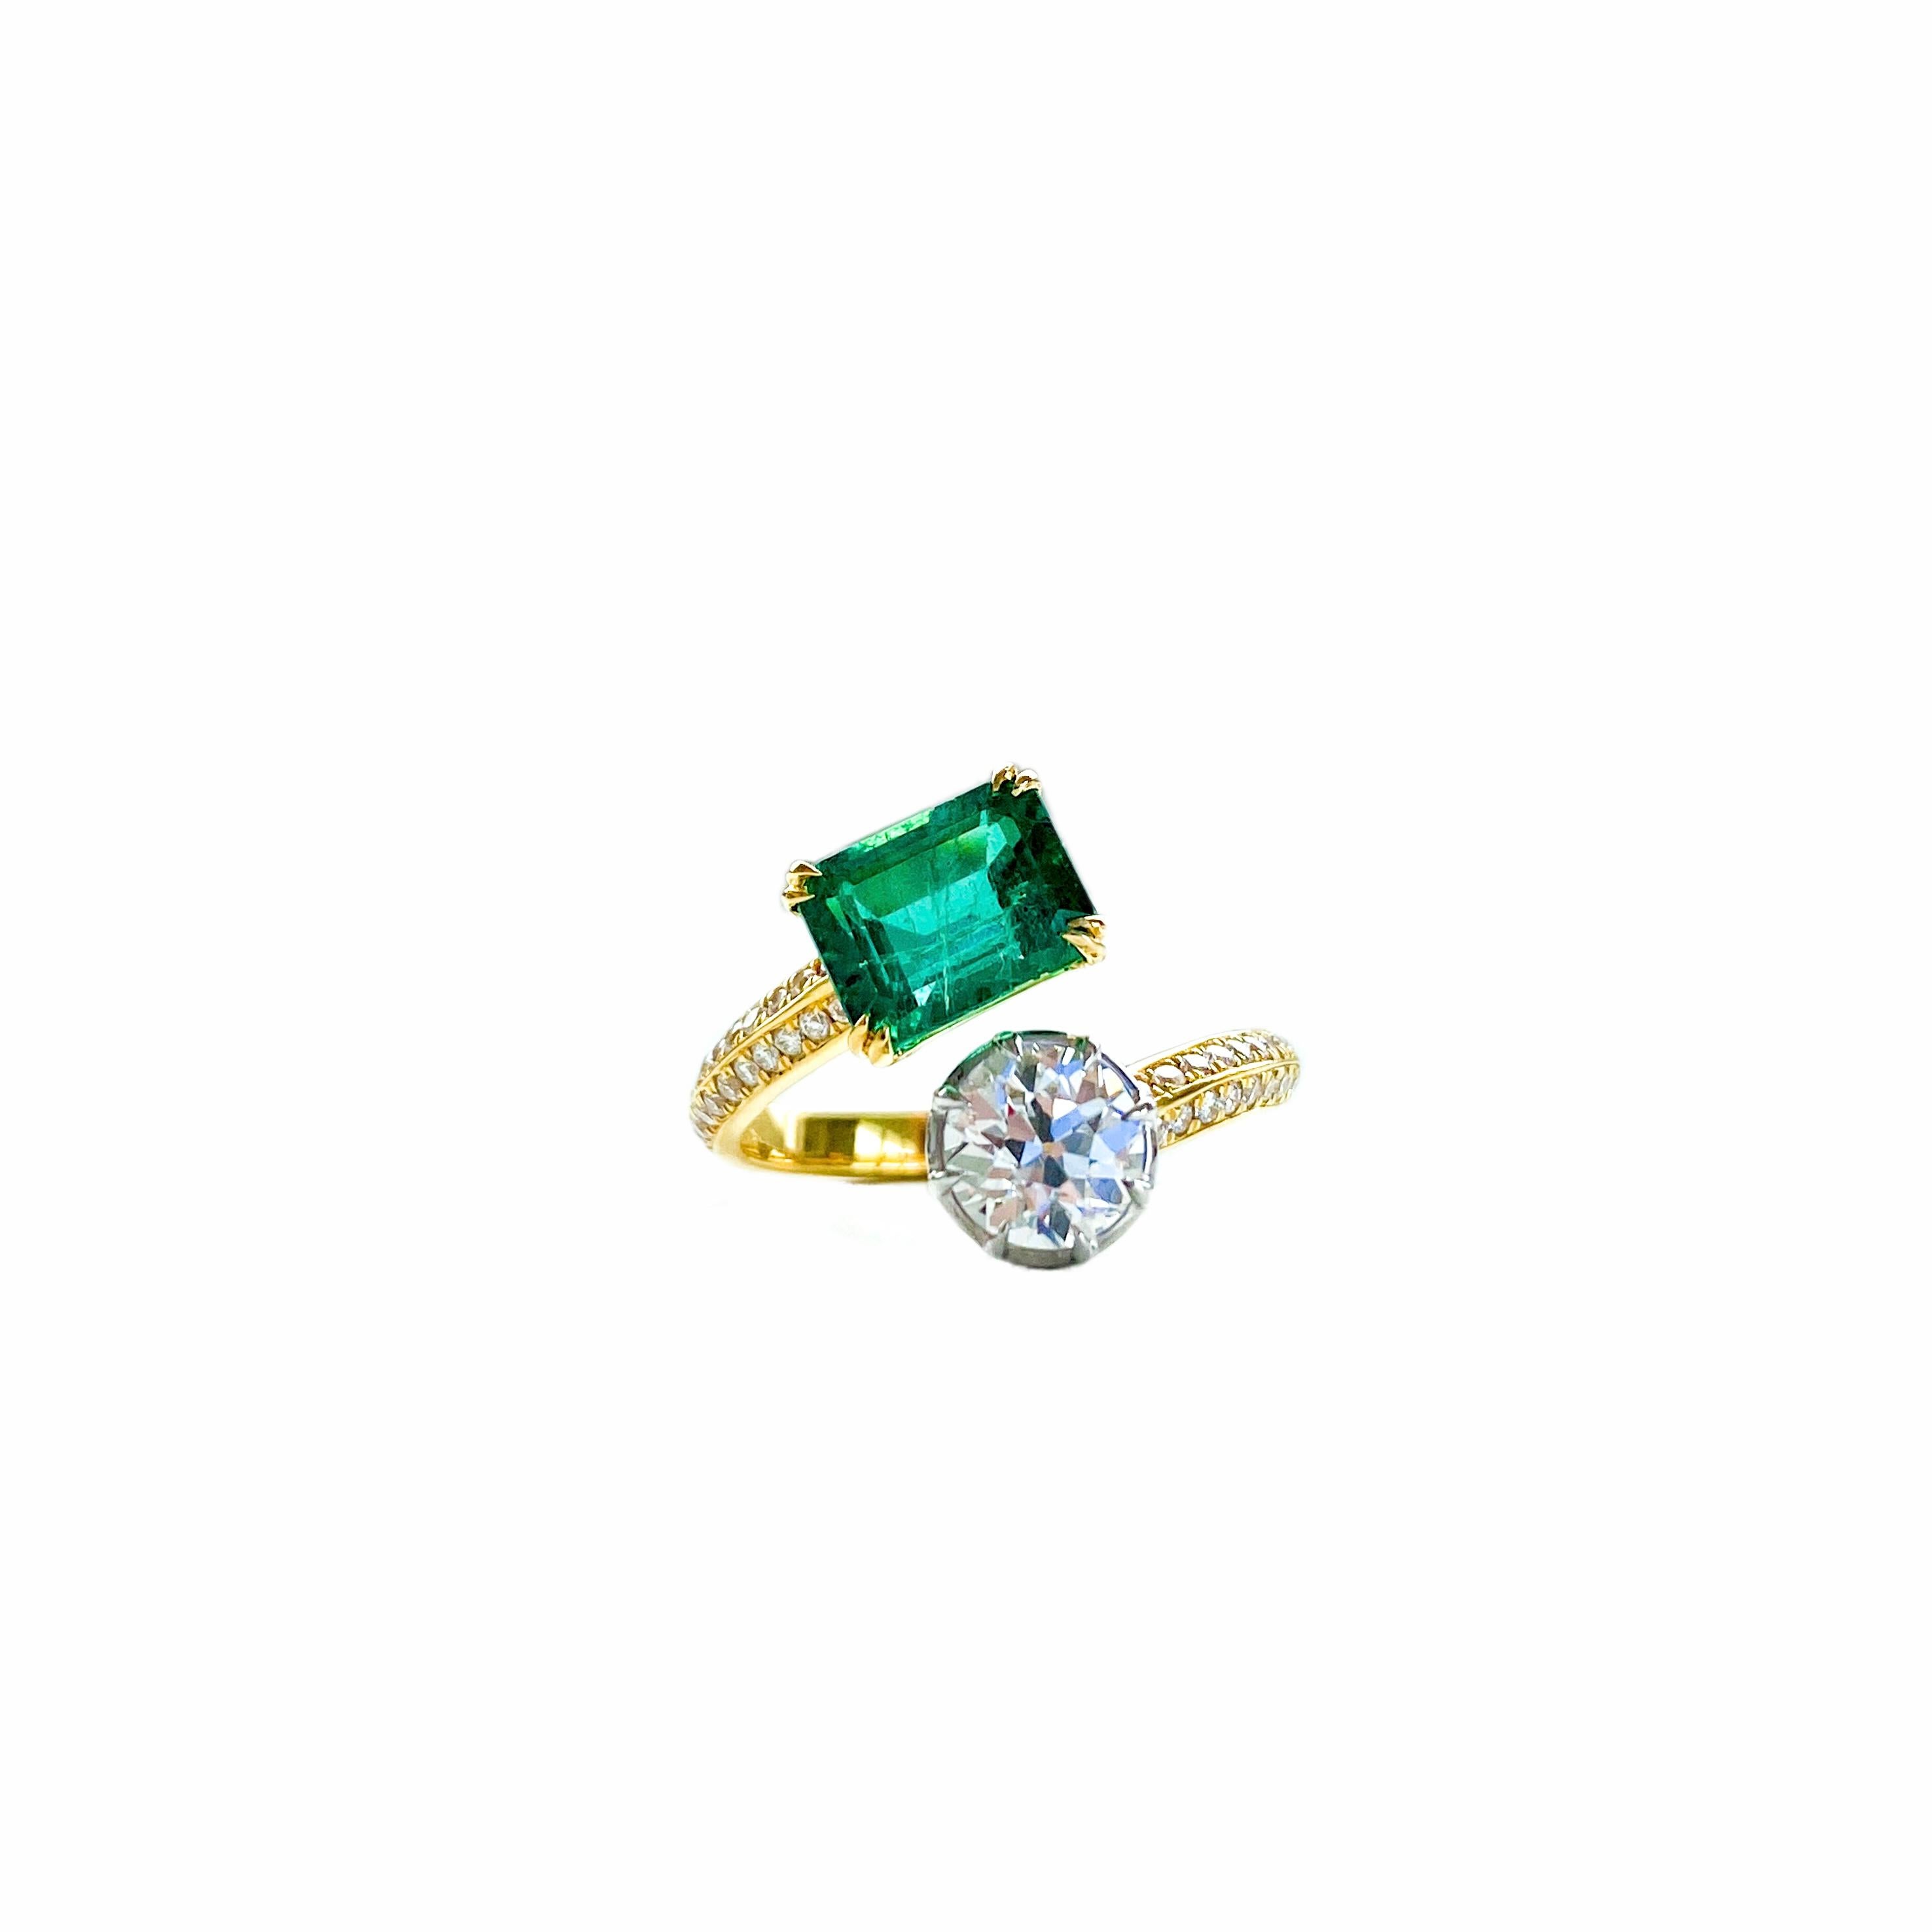 Beautiful toi et moi ring. 

1.71ct Zambian Vivid Green Emerald with excellent clarity and little inclusions. 
0.71ct Antique Old European cut Diamond with GIA certificate, J colour SI2 clarity. 

The diamond looks completely eye clean and faces up